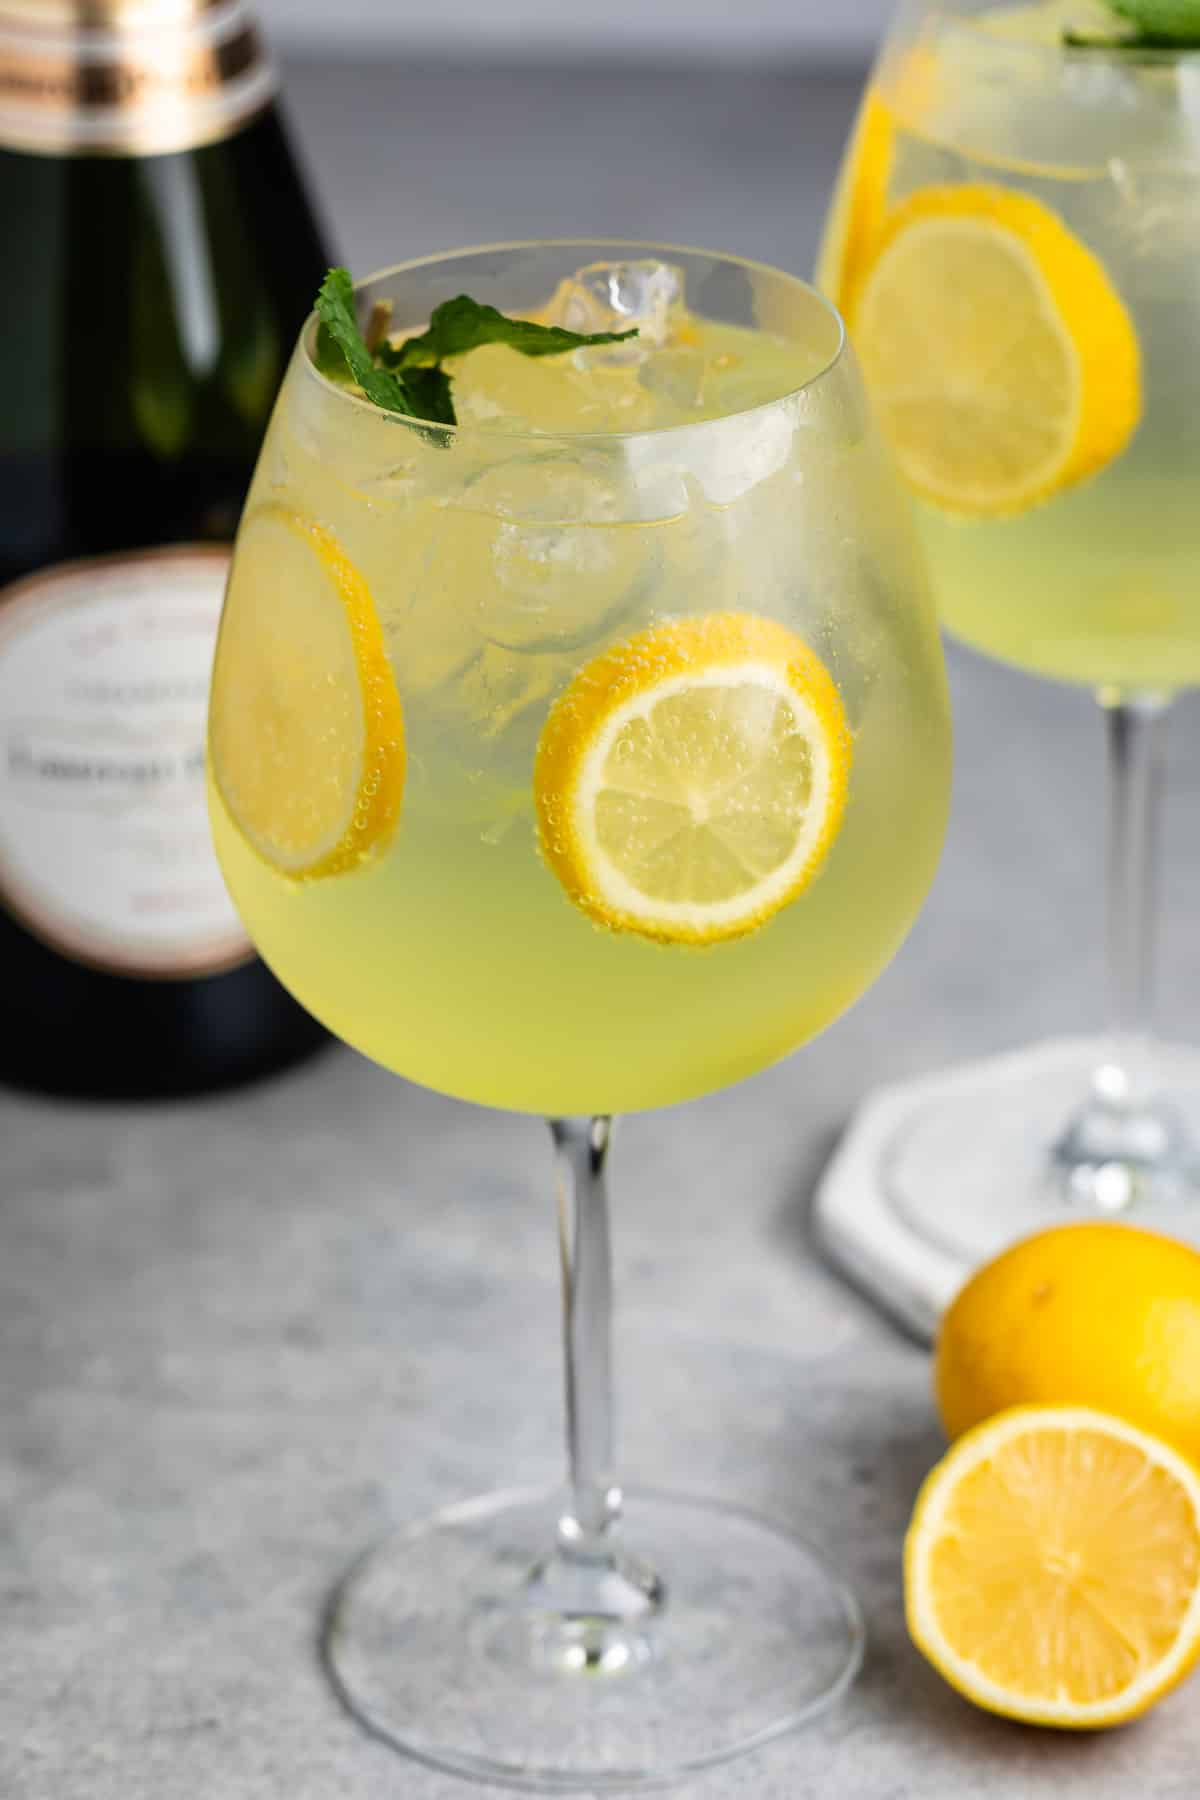 tall clear glass of yellow limoncello with sliced lemons throughout the drink.